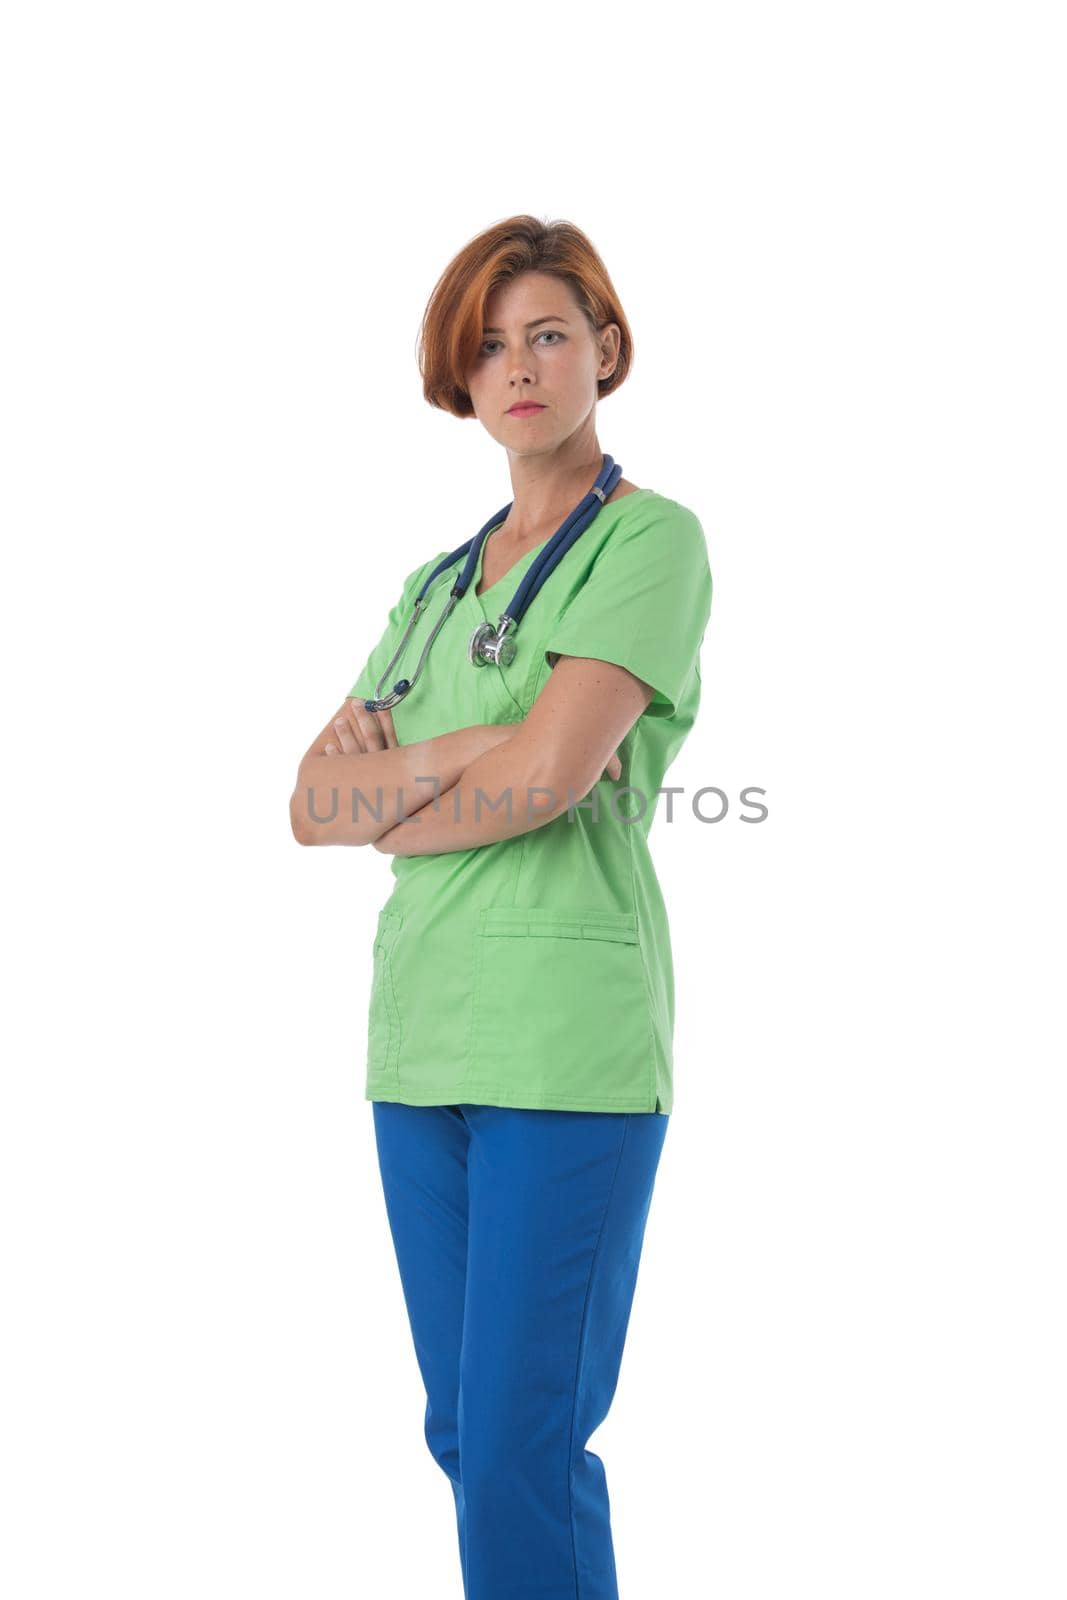 Medical nurse isolated on white background. Female medical professional doctor standing with arms folded